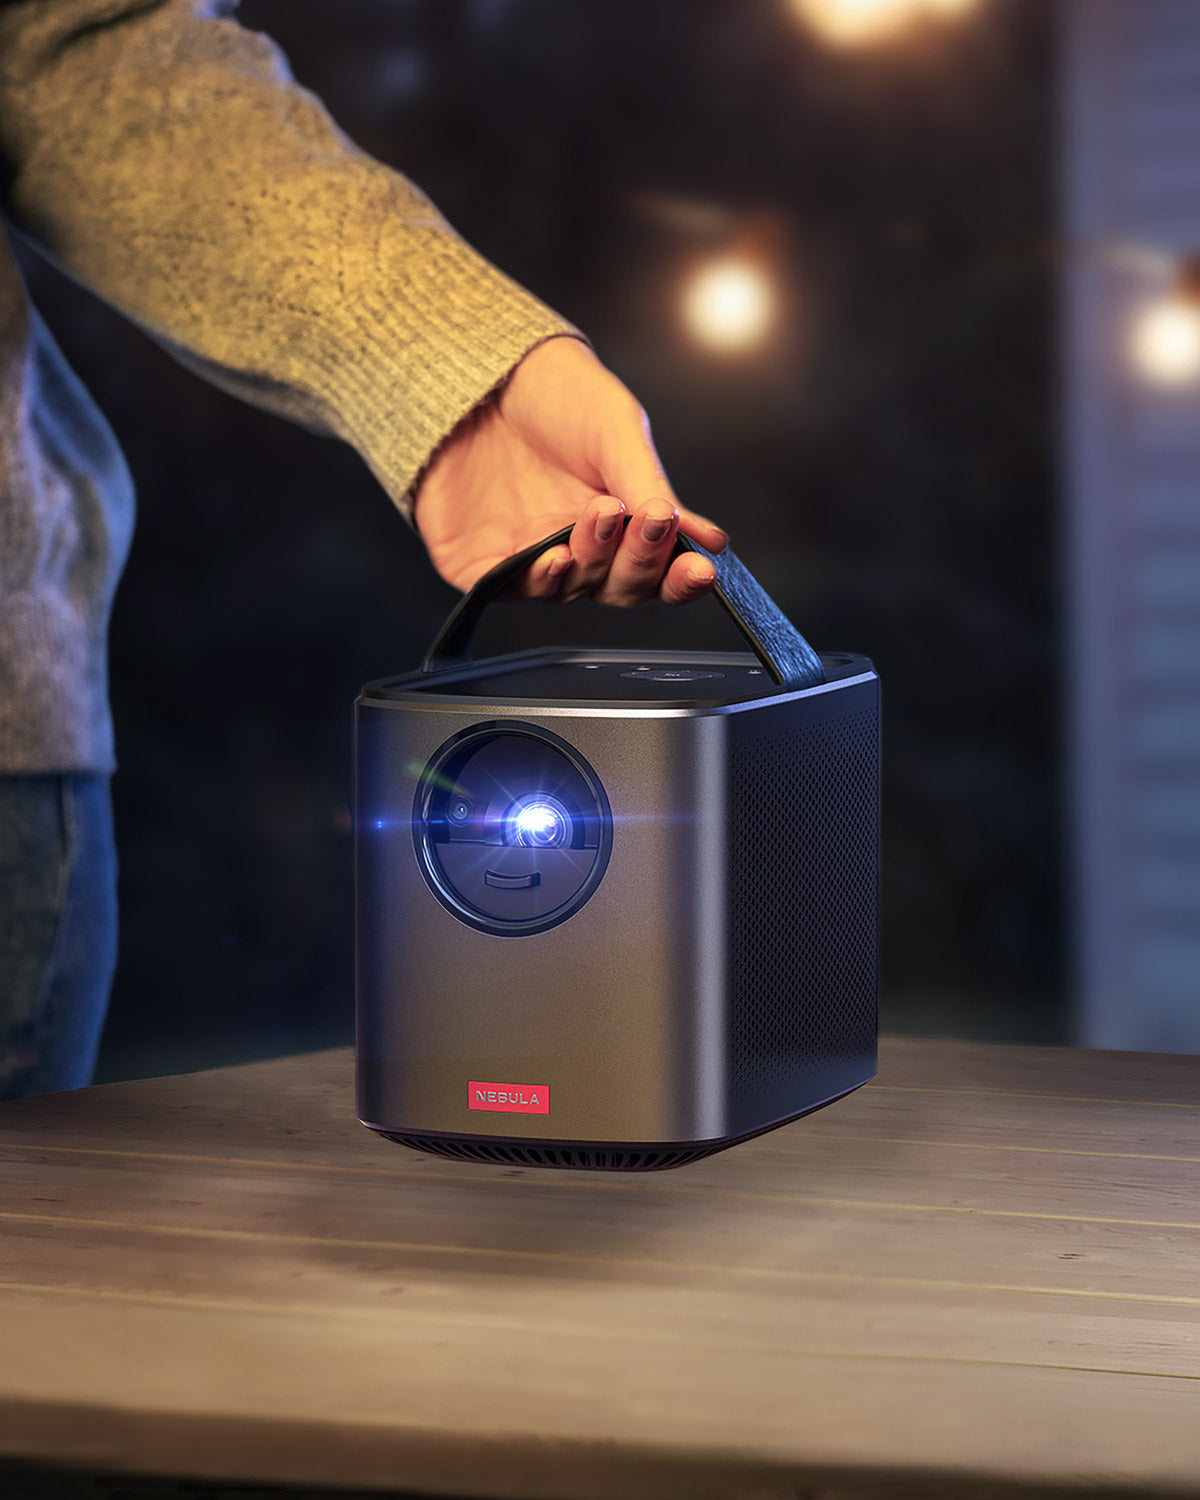 A hand uses the Nebula Mars II Pro handle to lift the portable projector off a wooden table.